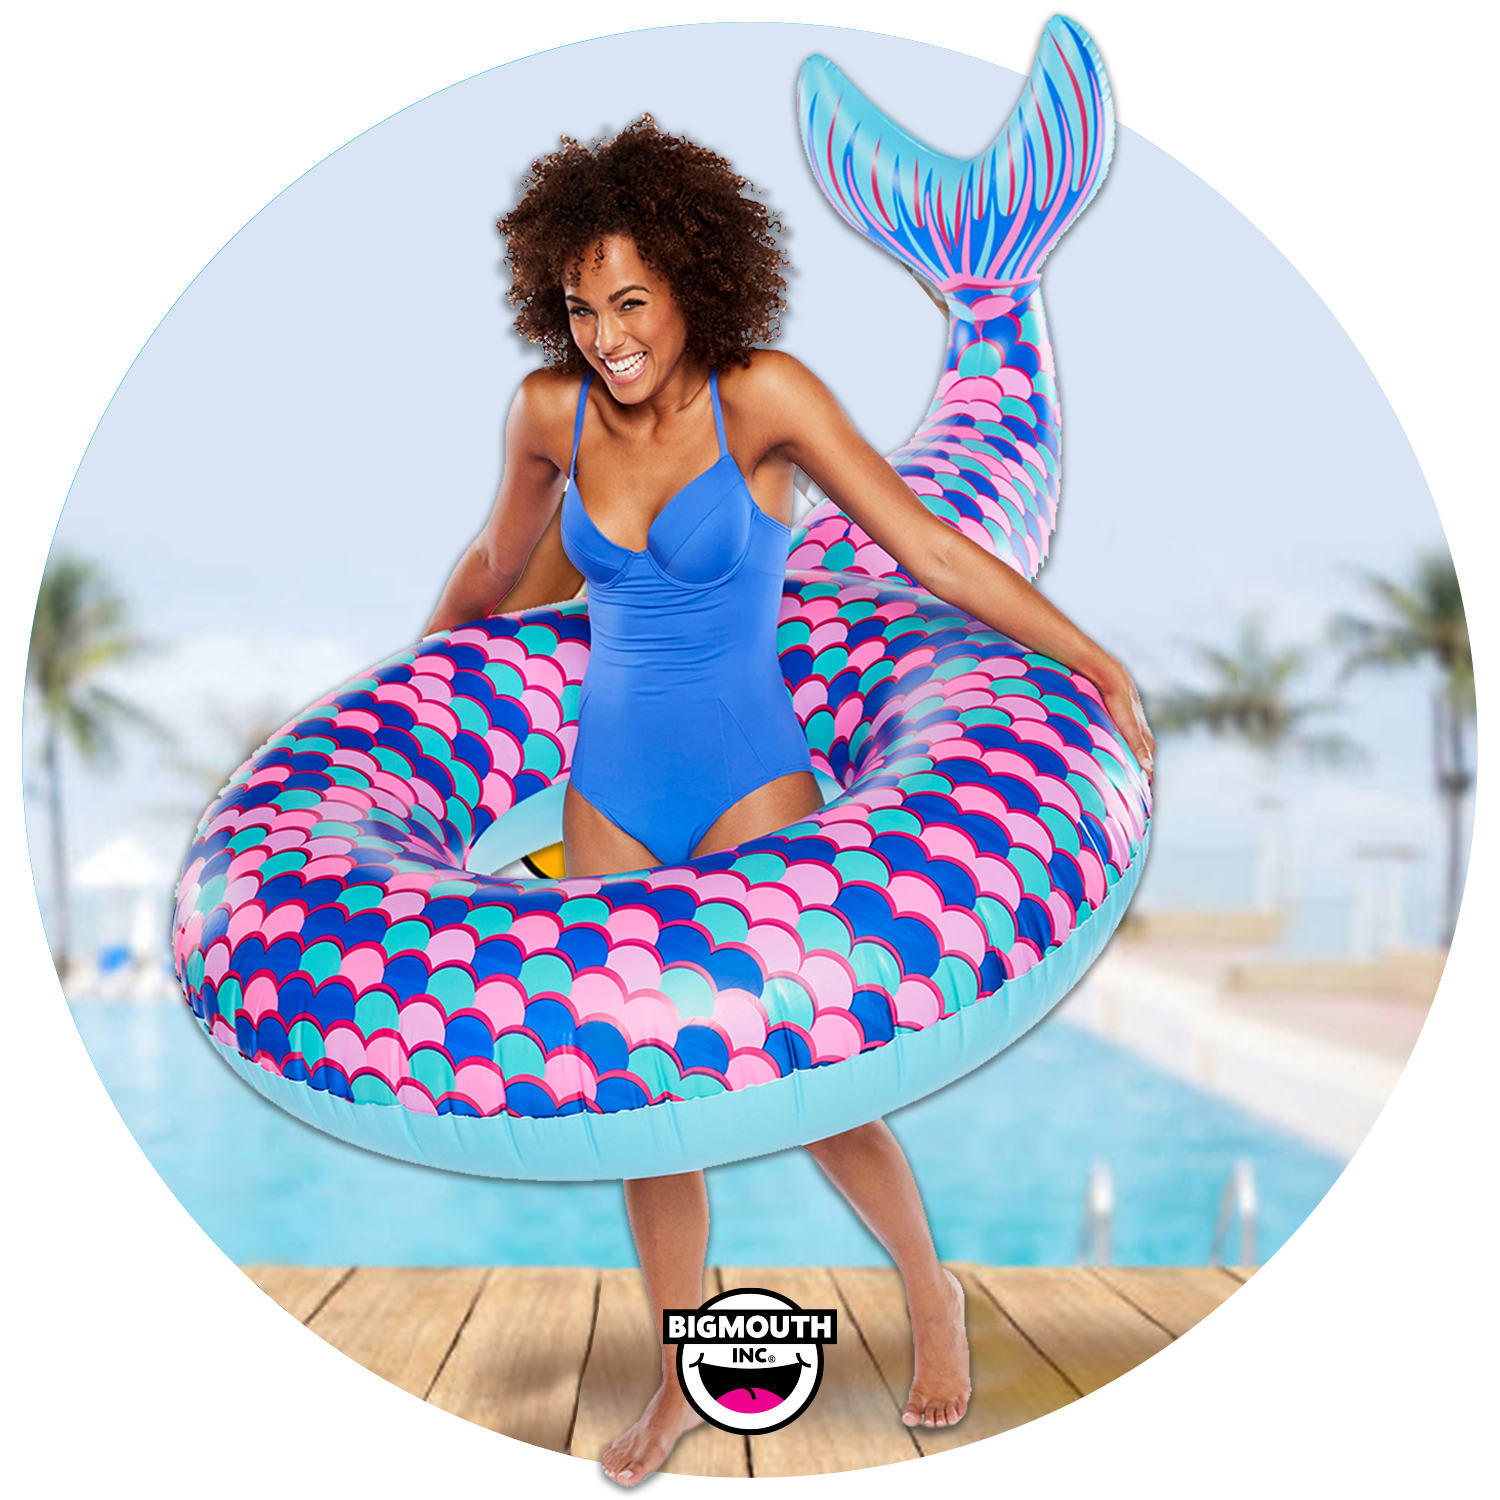 BigMouth Inc | Pool Floats, Giant Inflatables, Great Gift Ideas